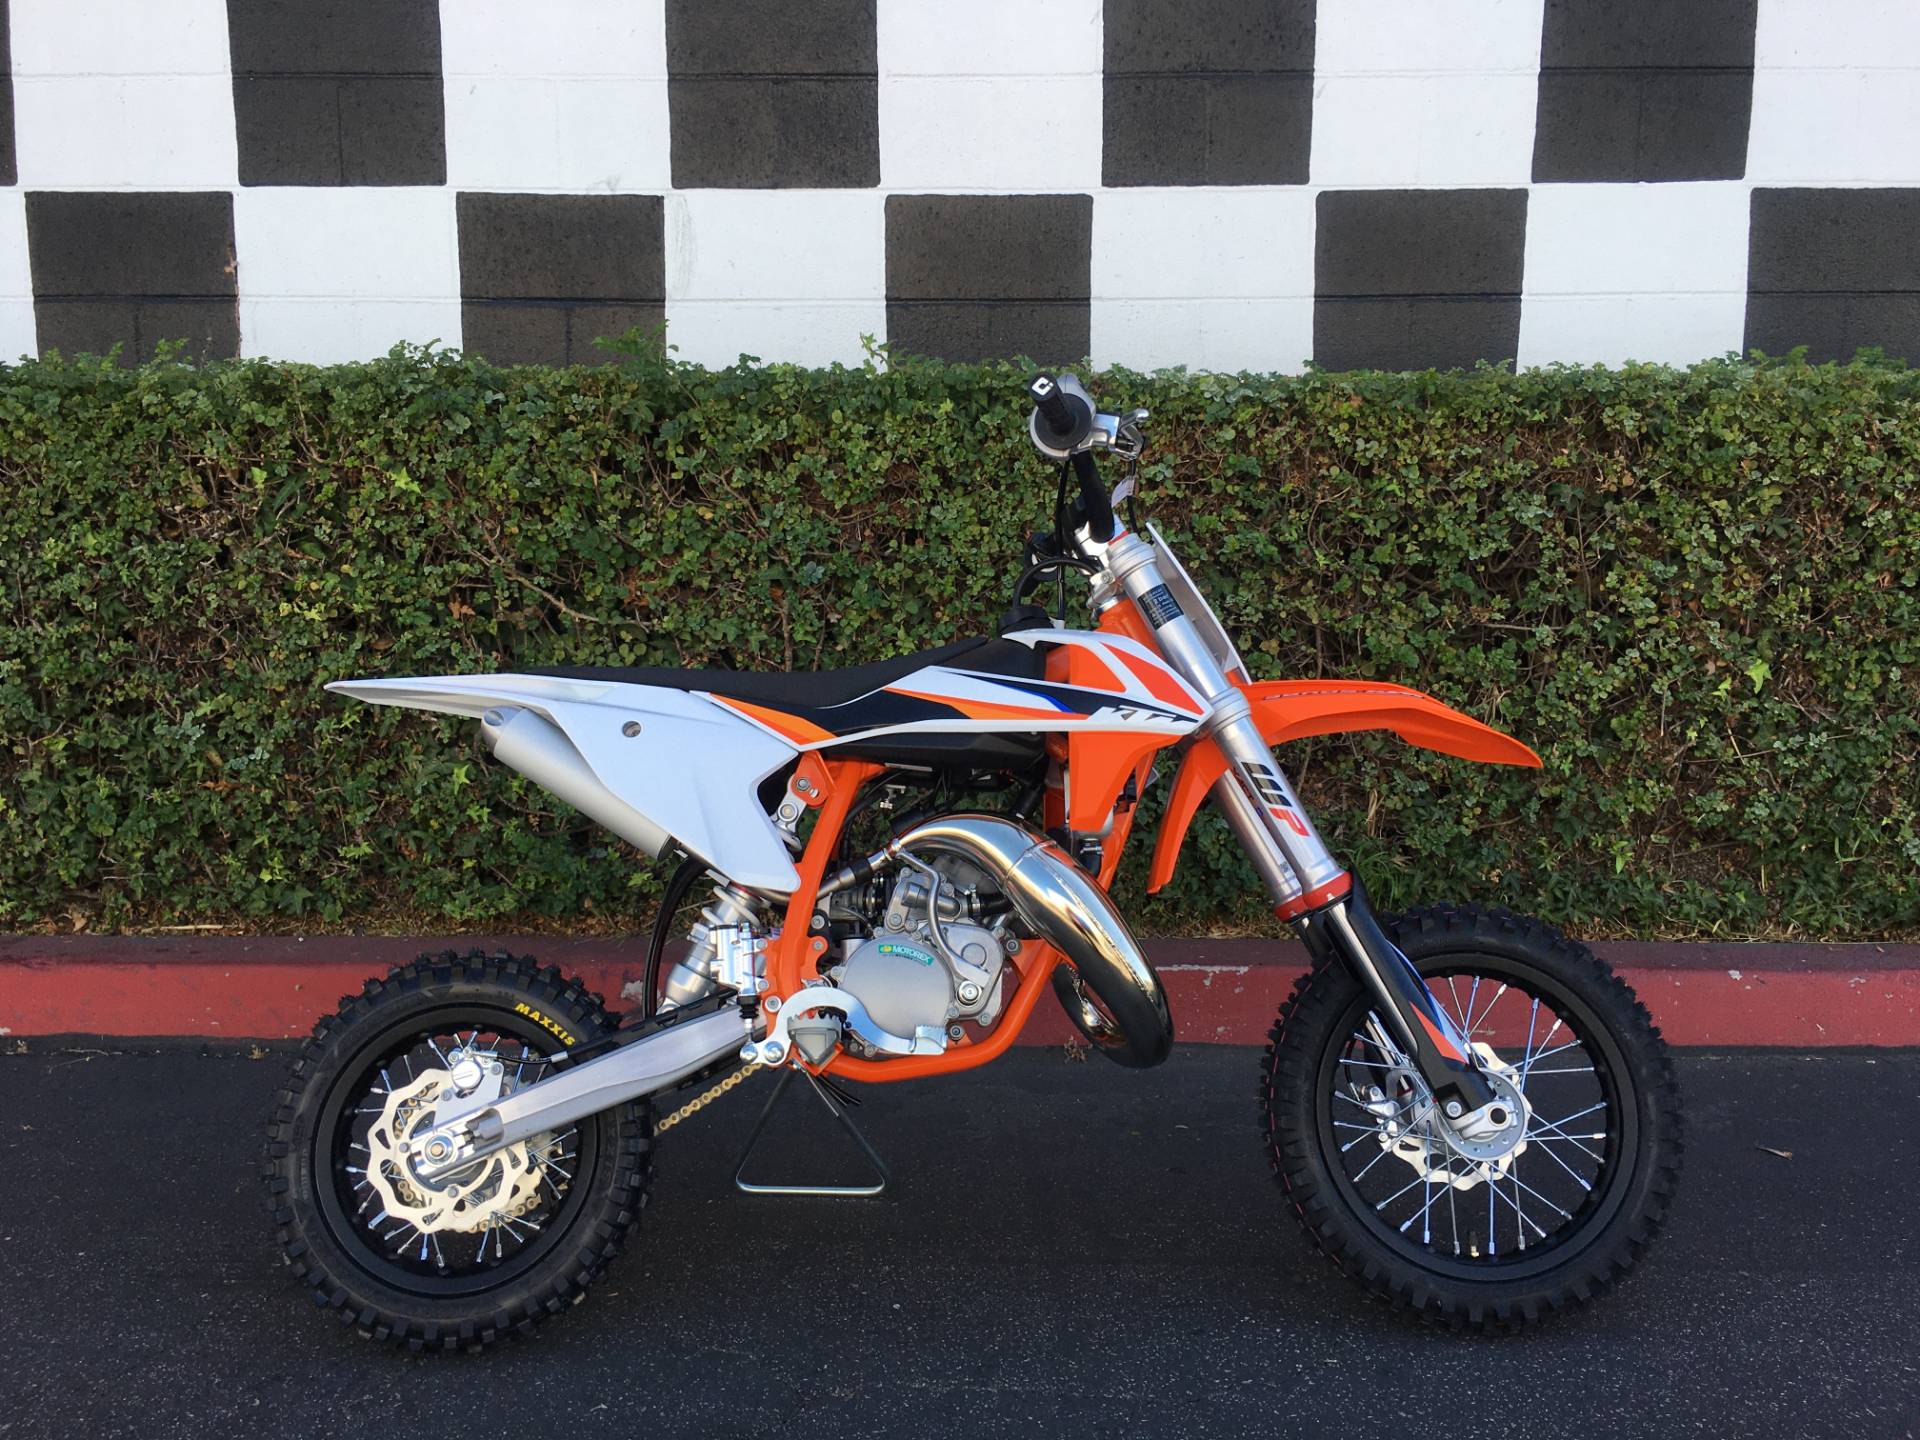 New Ktm Sx Orange Motorcycles In Costa Mesa Ca Out Of